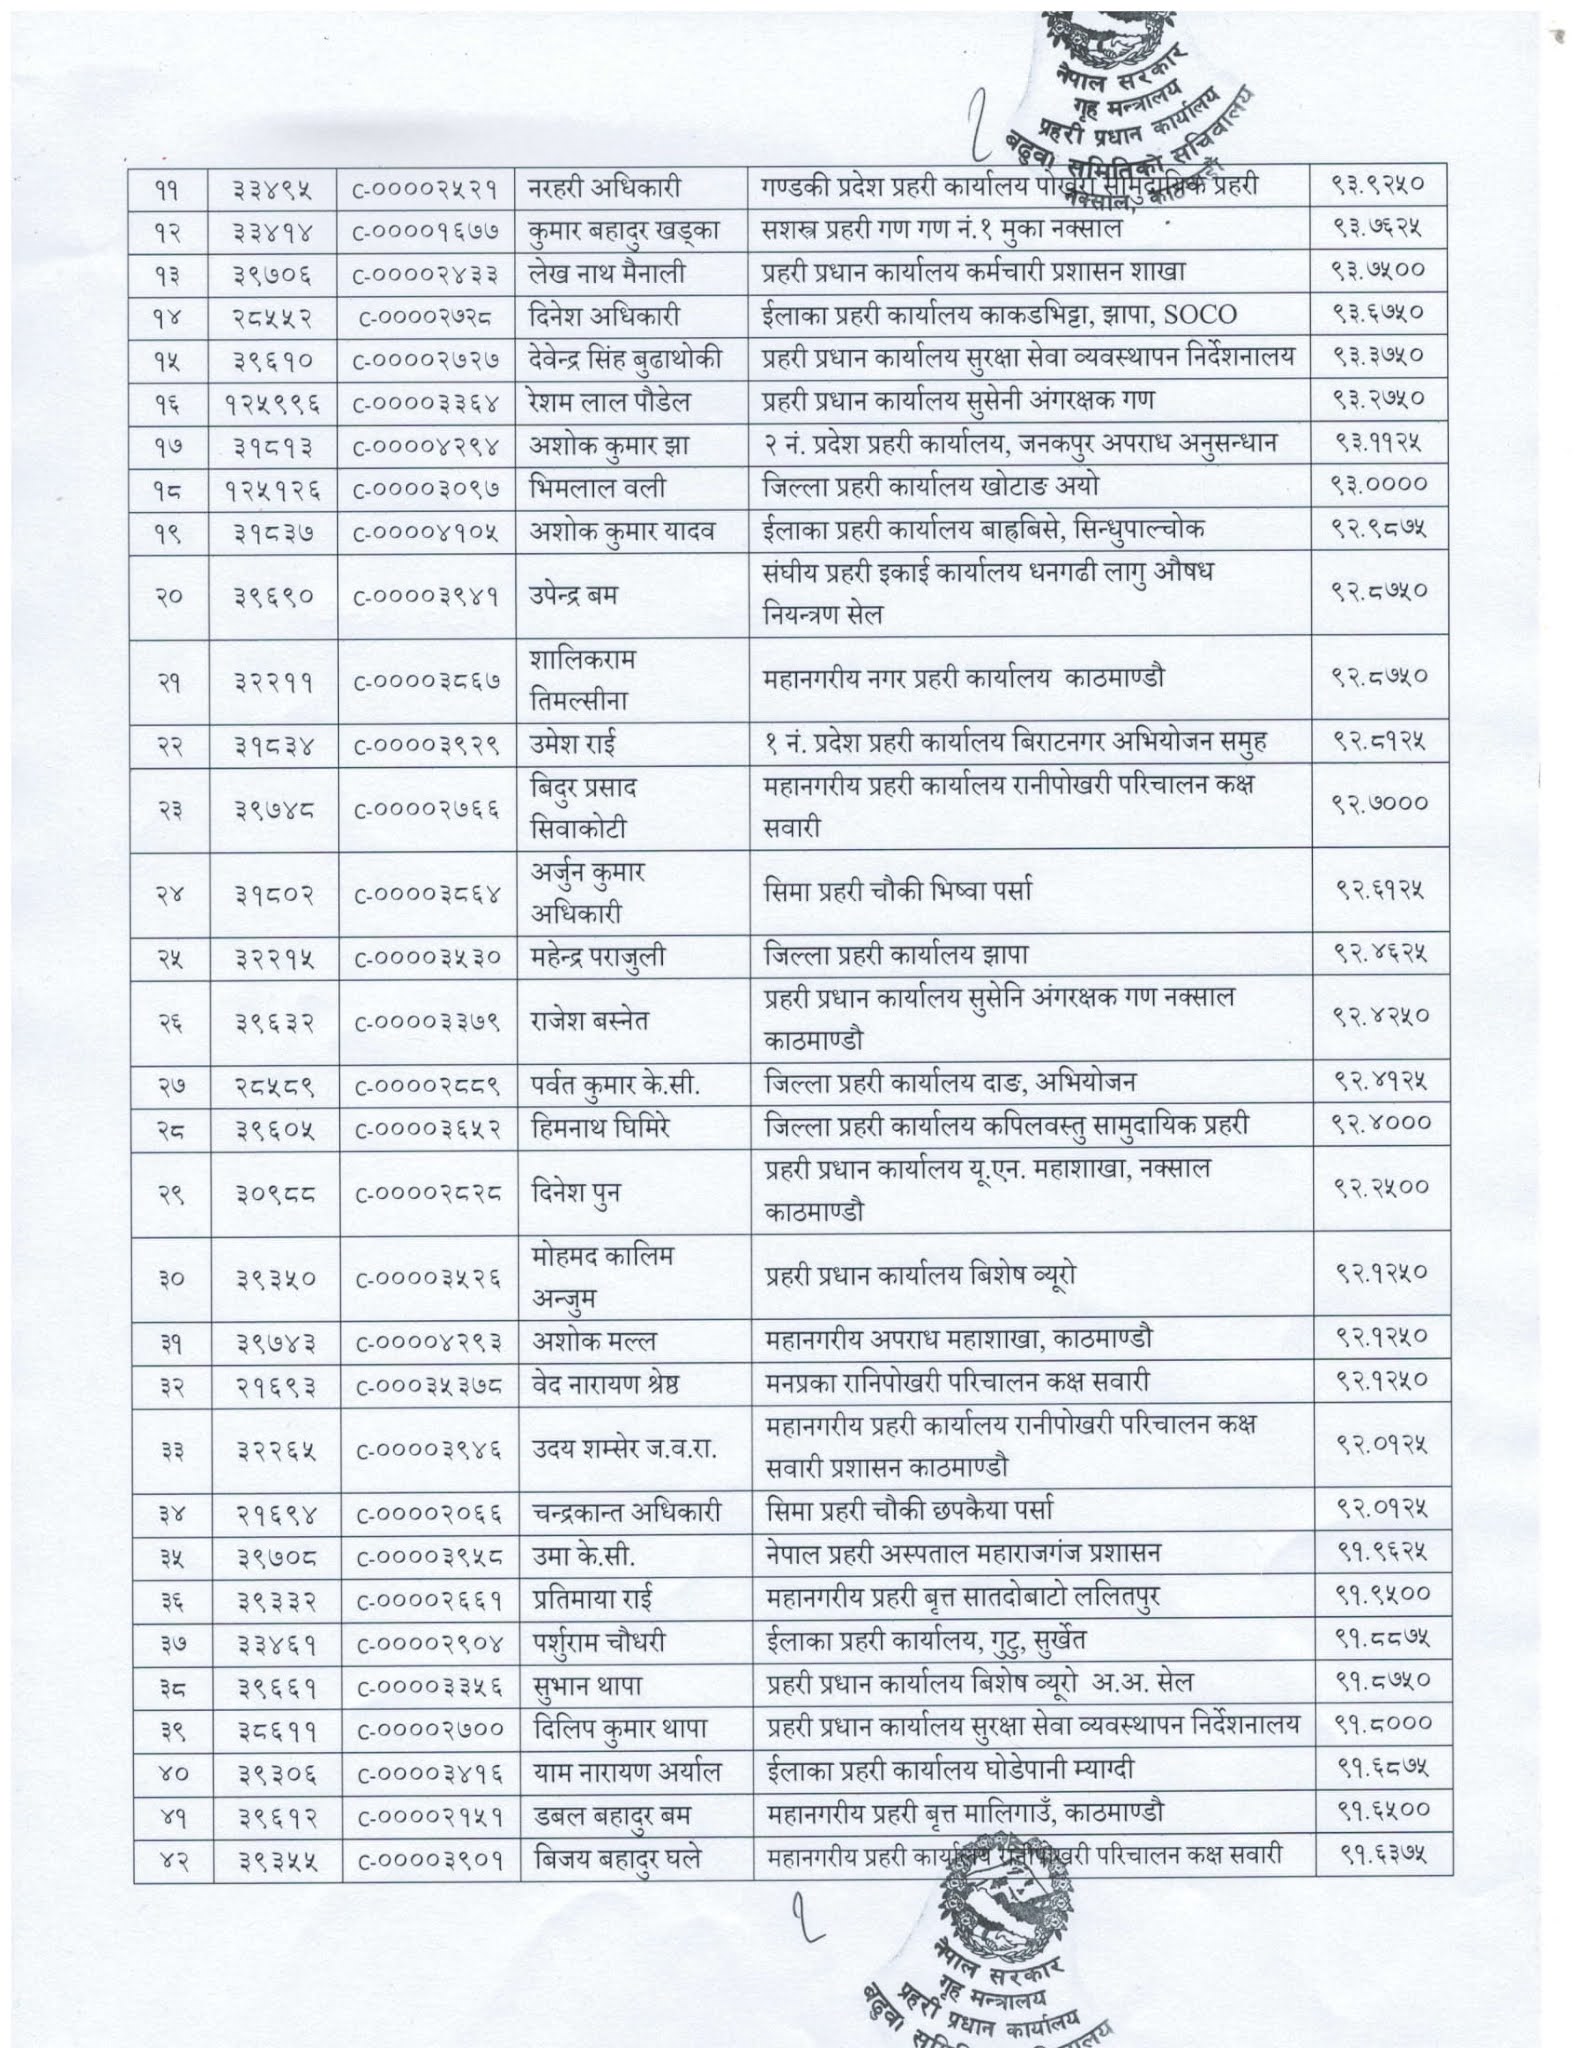 Nepal Police Promotion Recommendation List From SI to Police Inspector